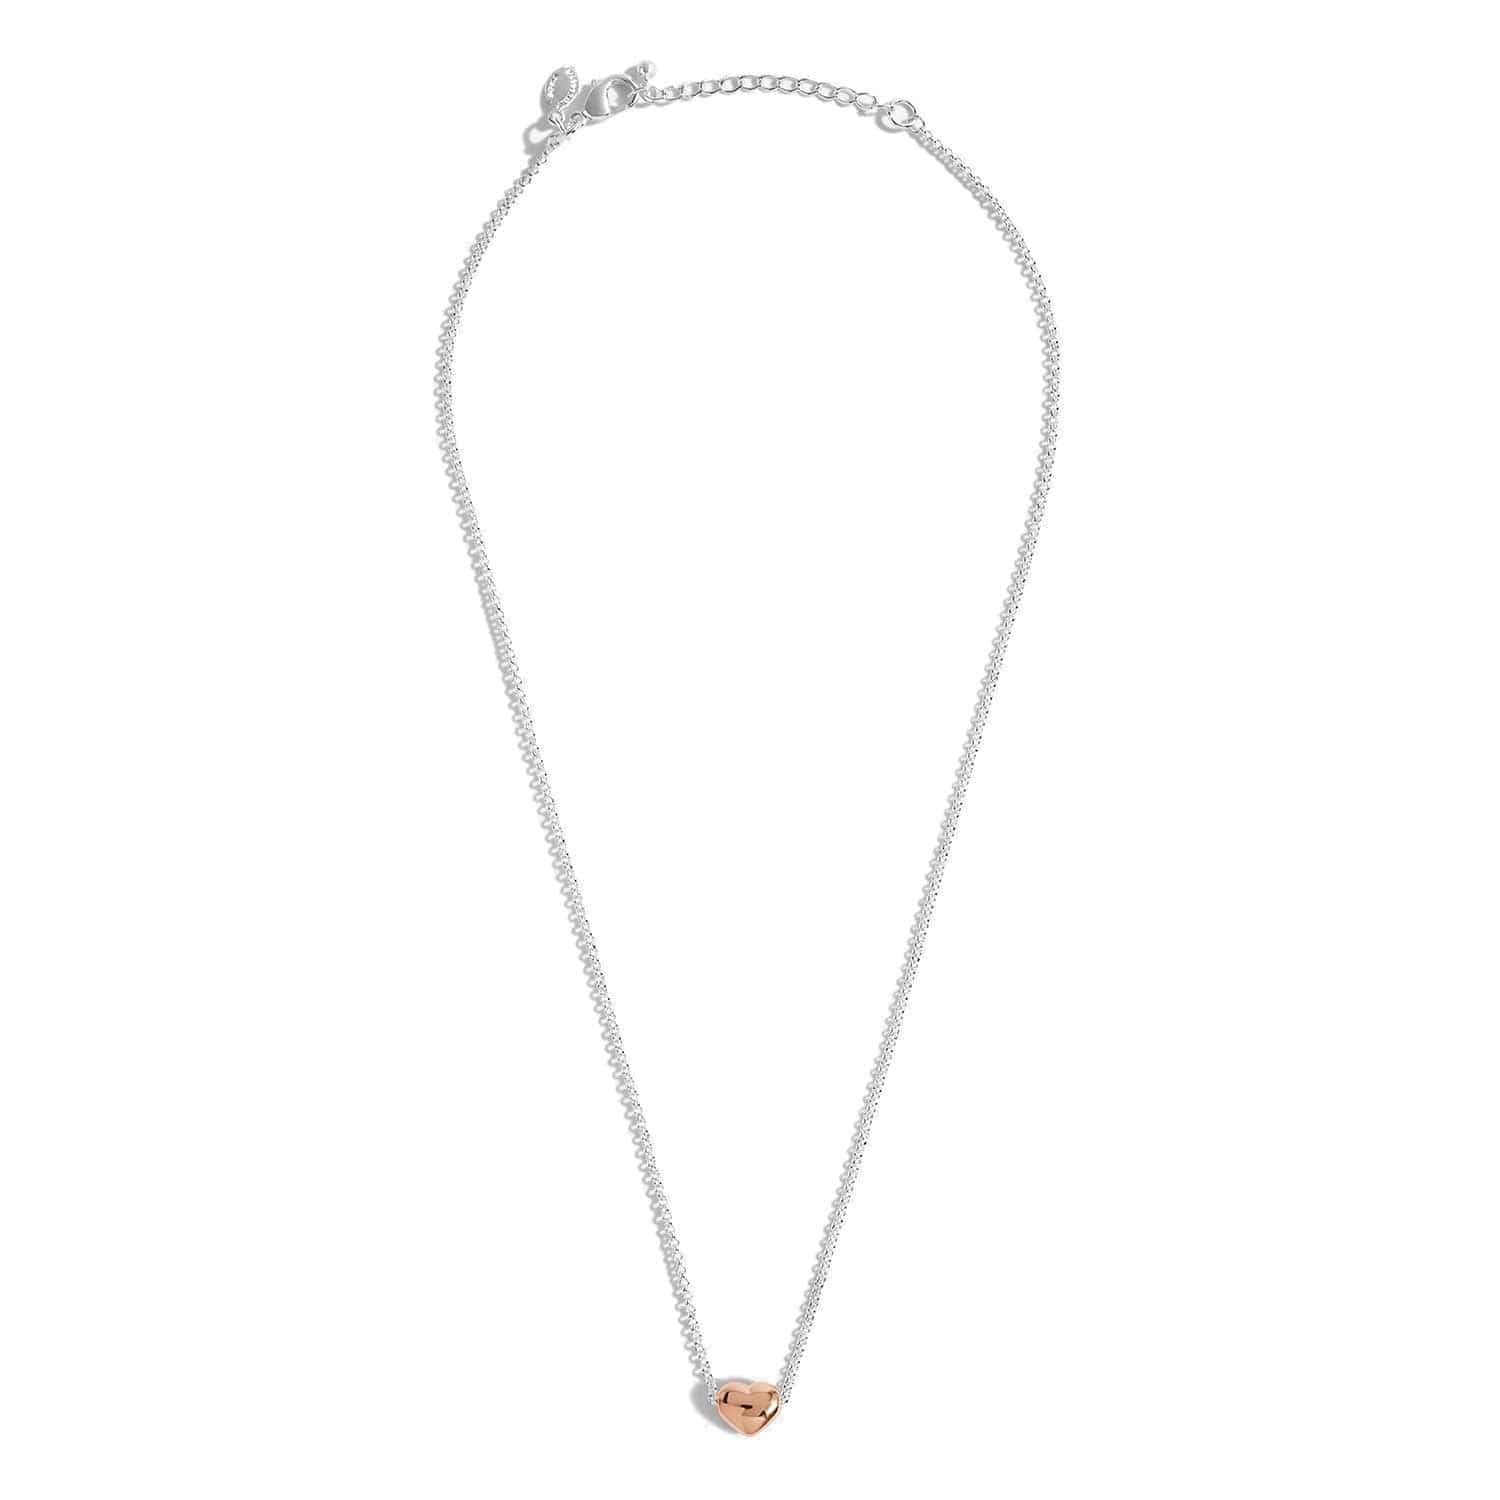 Joma Jewellery Necklace Joma Jewellery Necklace - A little Proud Of You